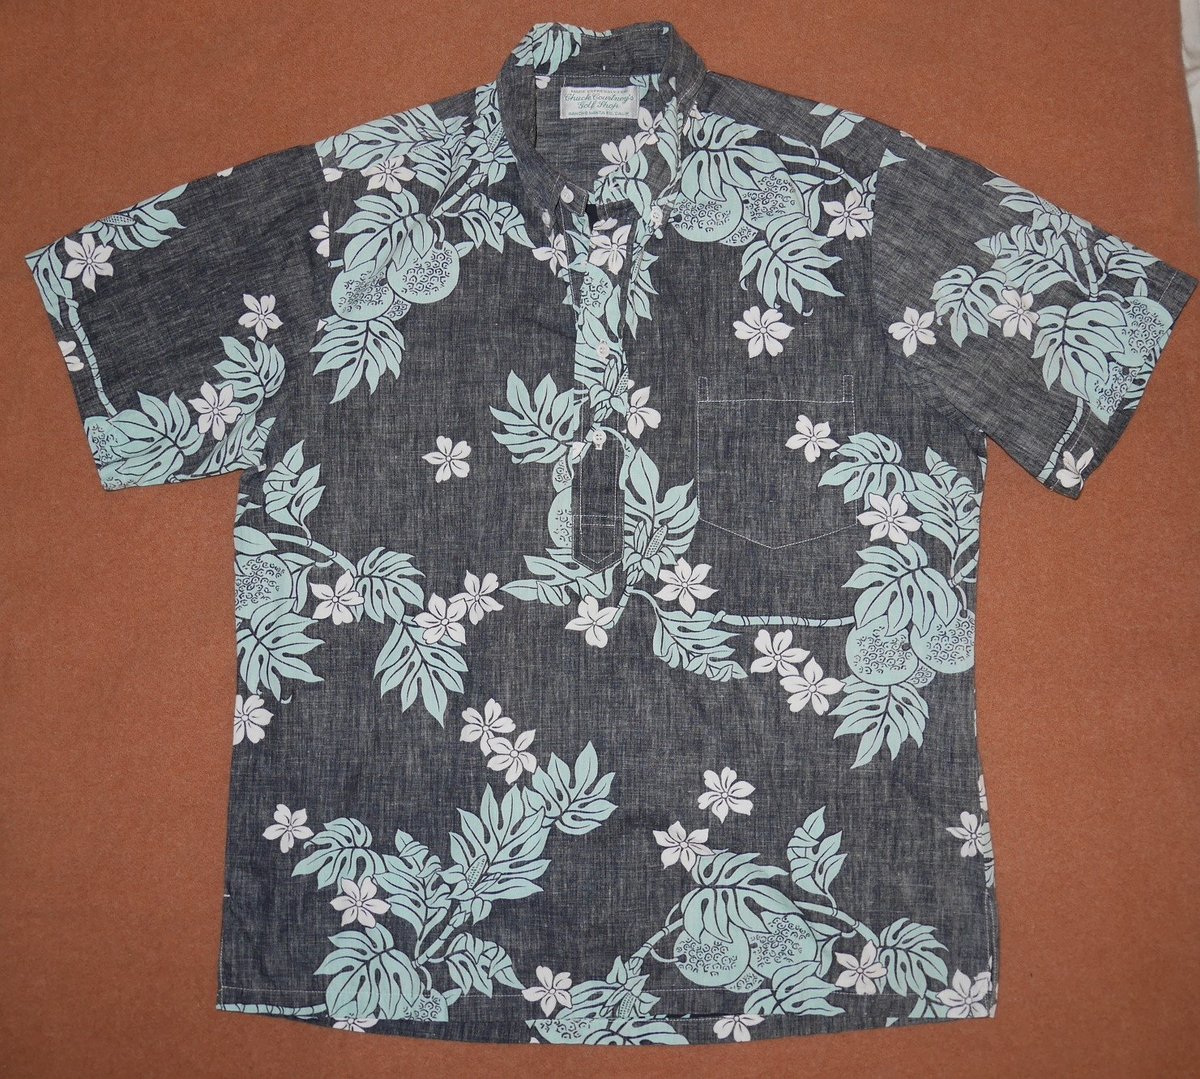 Excited to share the latest addition to my #etsy shop: Rare vintage pullover Hawaiian Shirt Cotton Large Made in Hawaii etsy.me/39m69z7 #clothing #men #shirt #vintagehawaiian #vintagealohashirt #hawaiianshirt #largehawaiianshirt #madeinhawaii #forgedinfiretc